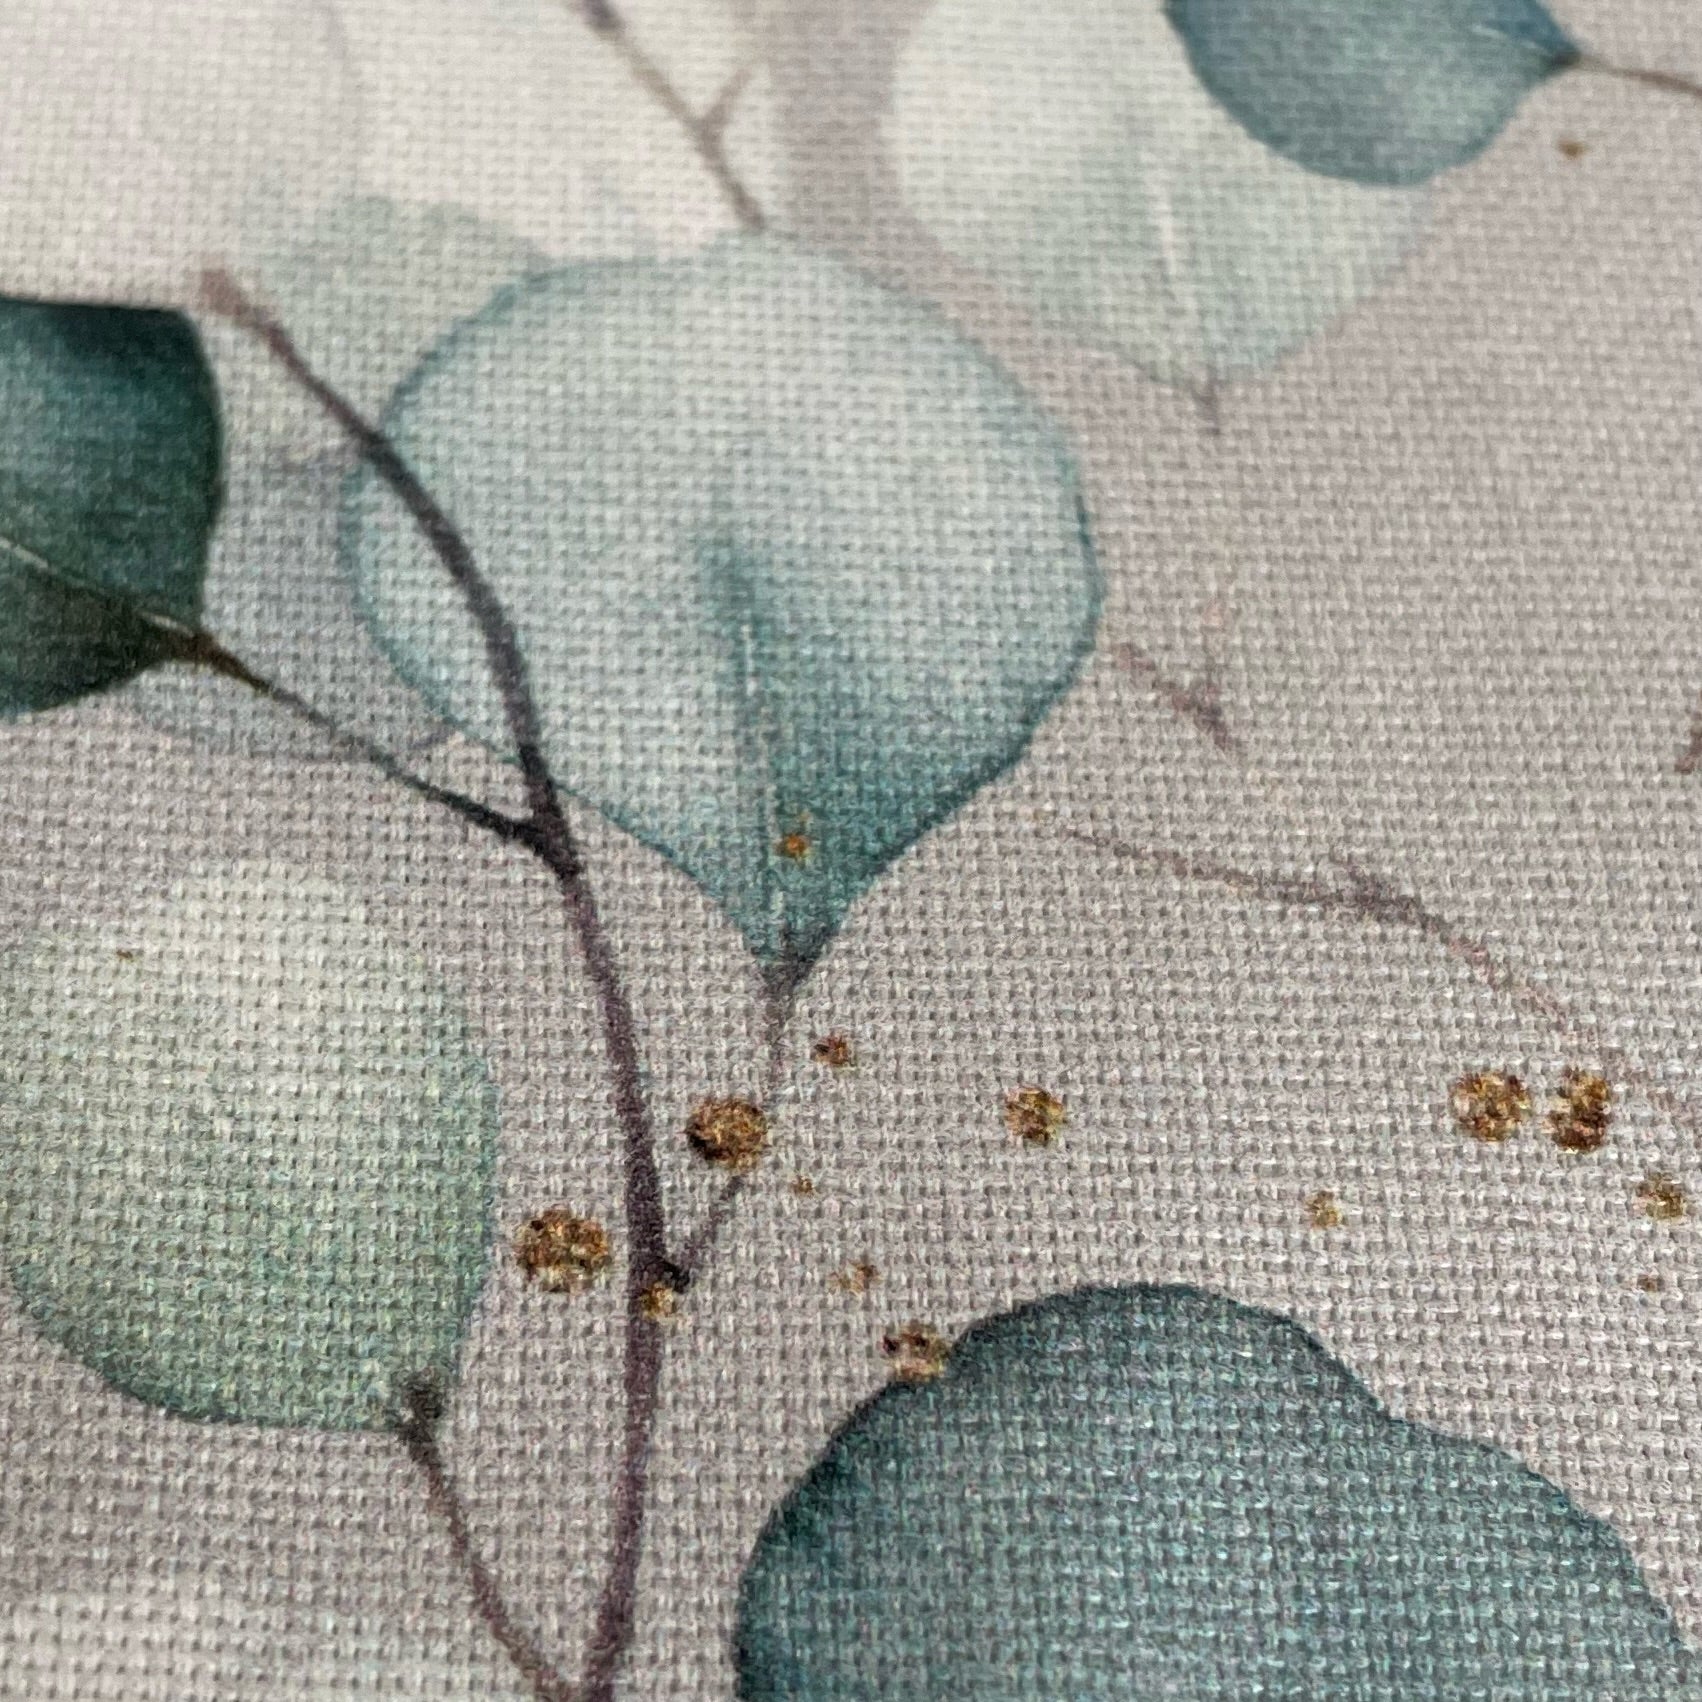 this stunning digitally printed 100% cotton&nbsp;eucalyptus leaves design on a light grey/silver background canvas &nbsp; It is a hardwearing Cotton woven canvas fabric, ideal for clothes, canvas bags, upholstery